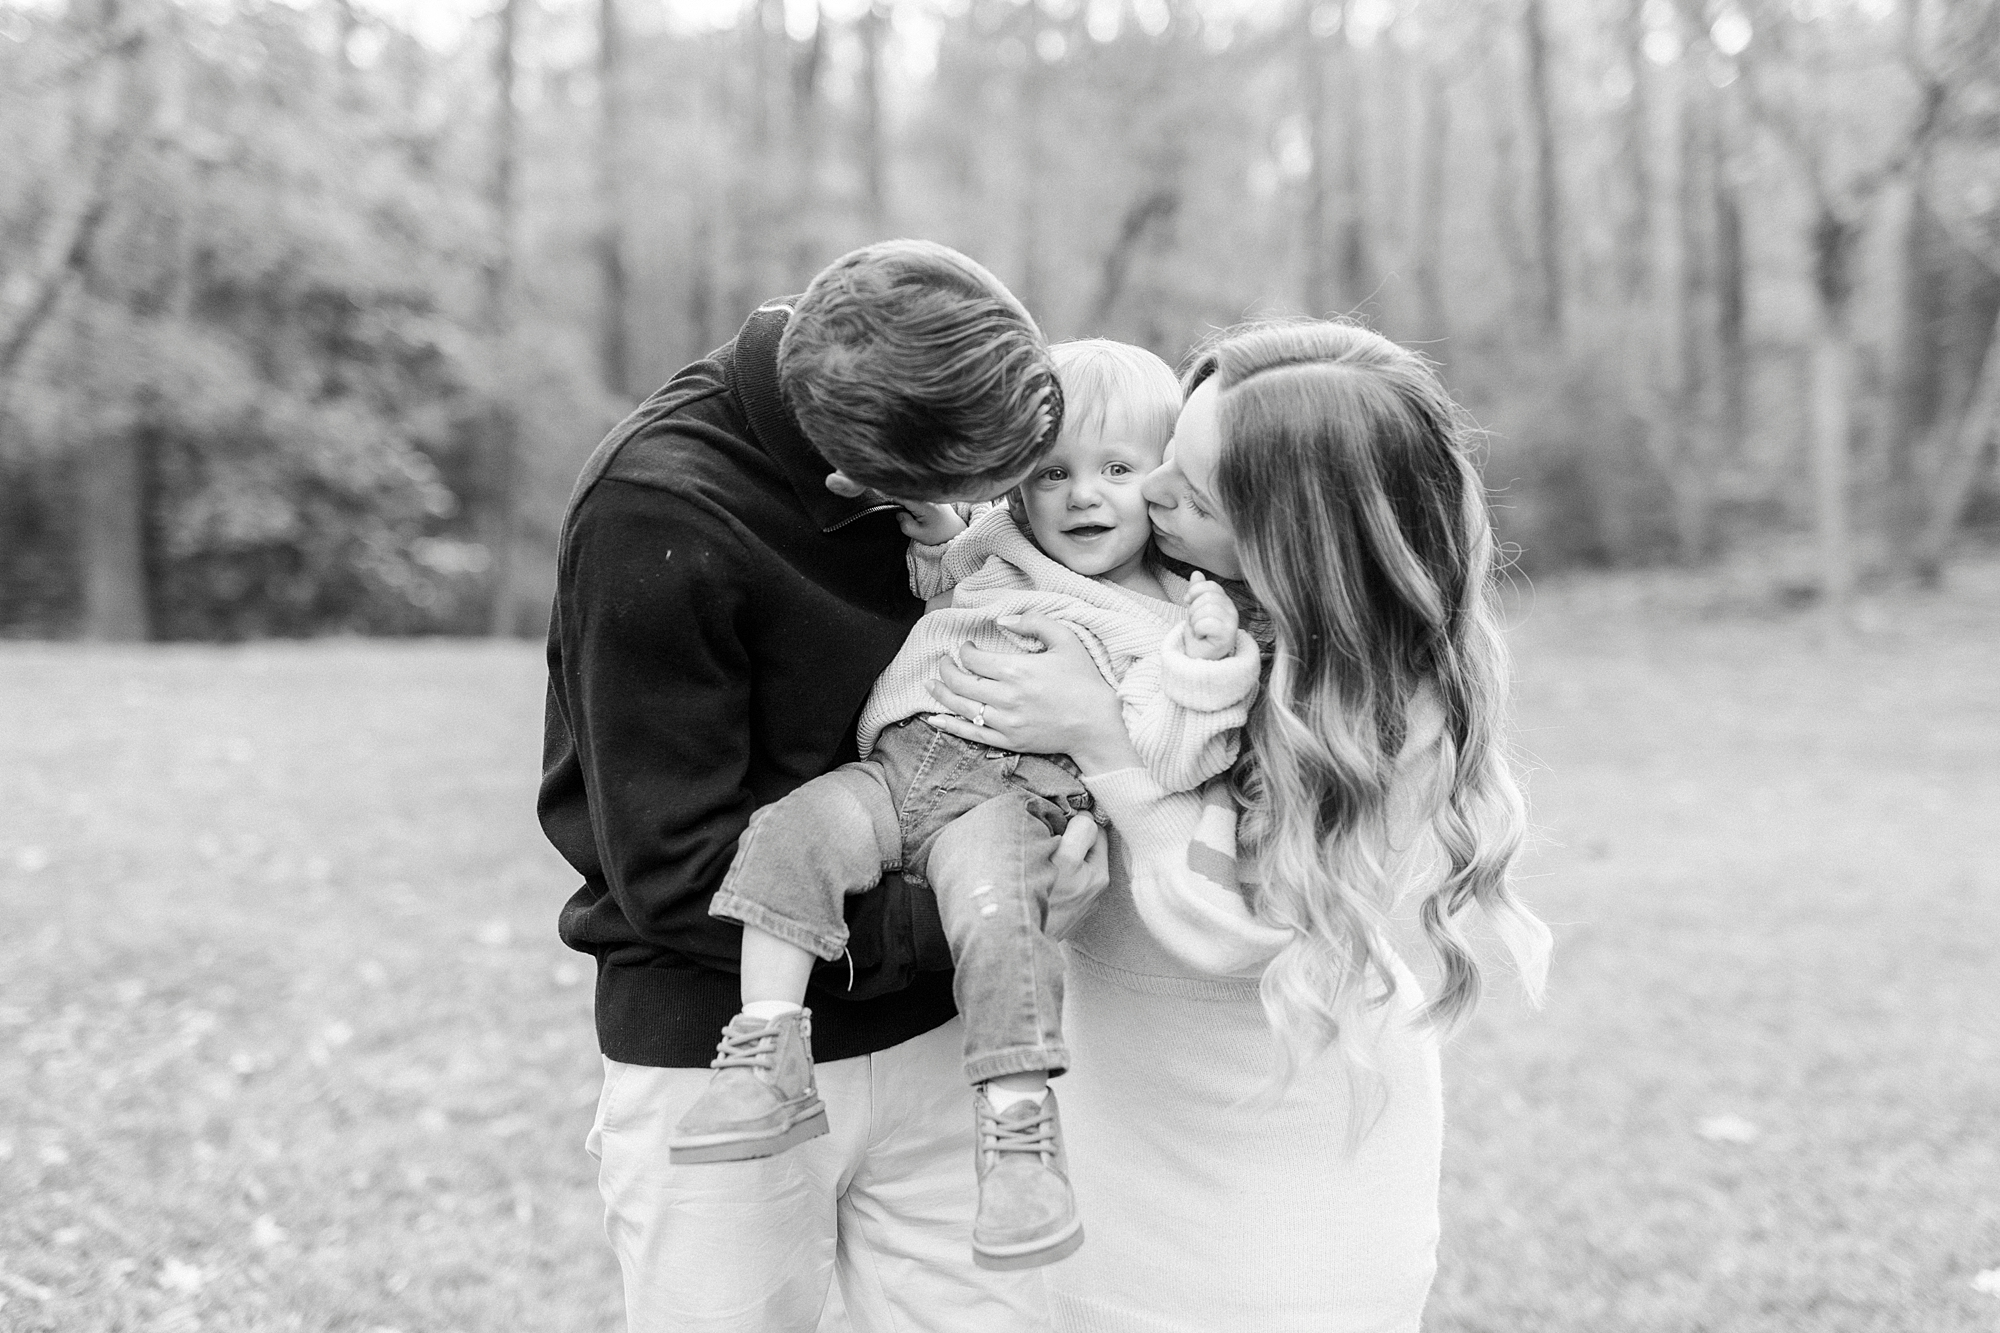 parents lean down to kiss son on cheeks hugging him tight during Baker's Creek Park family photos 